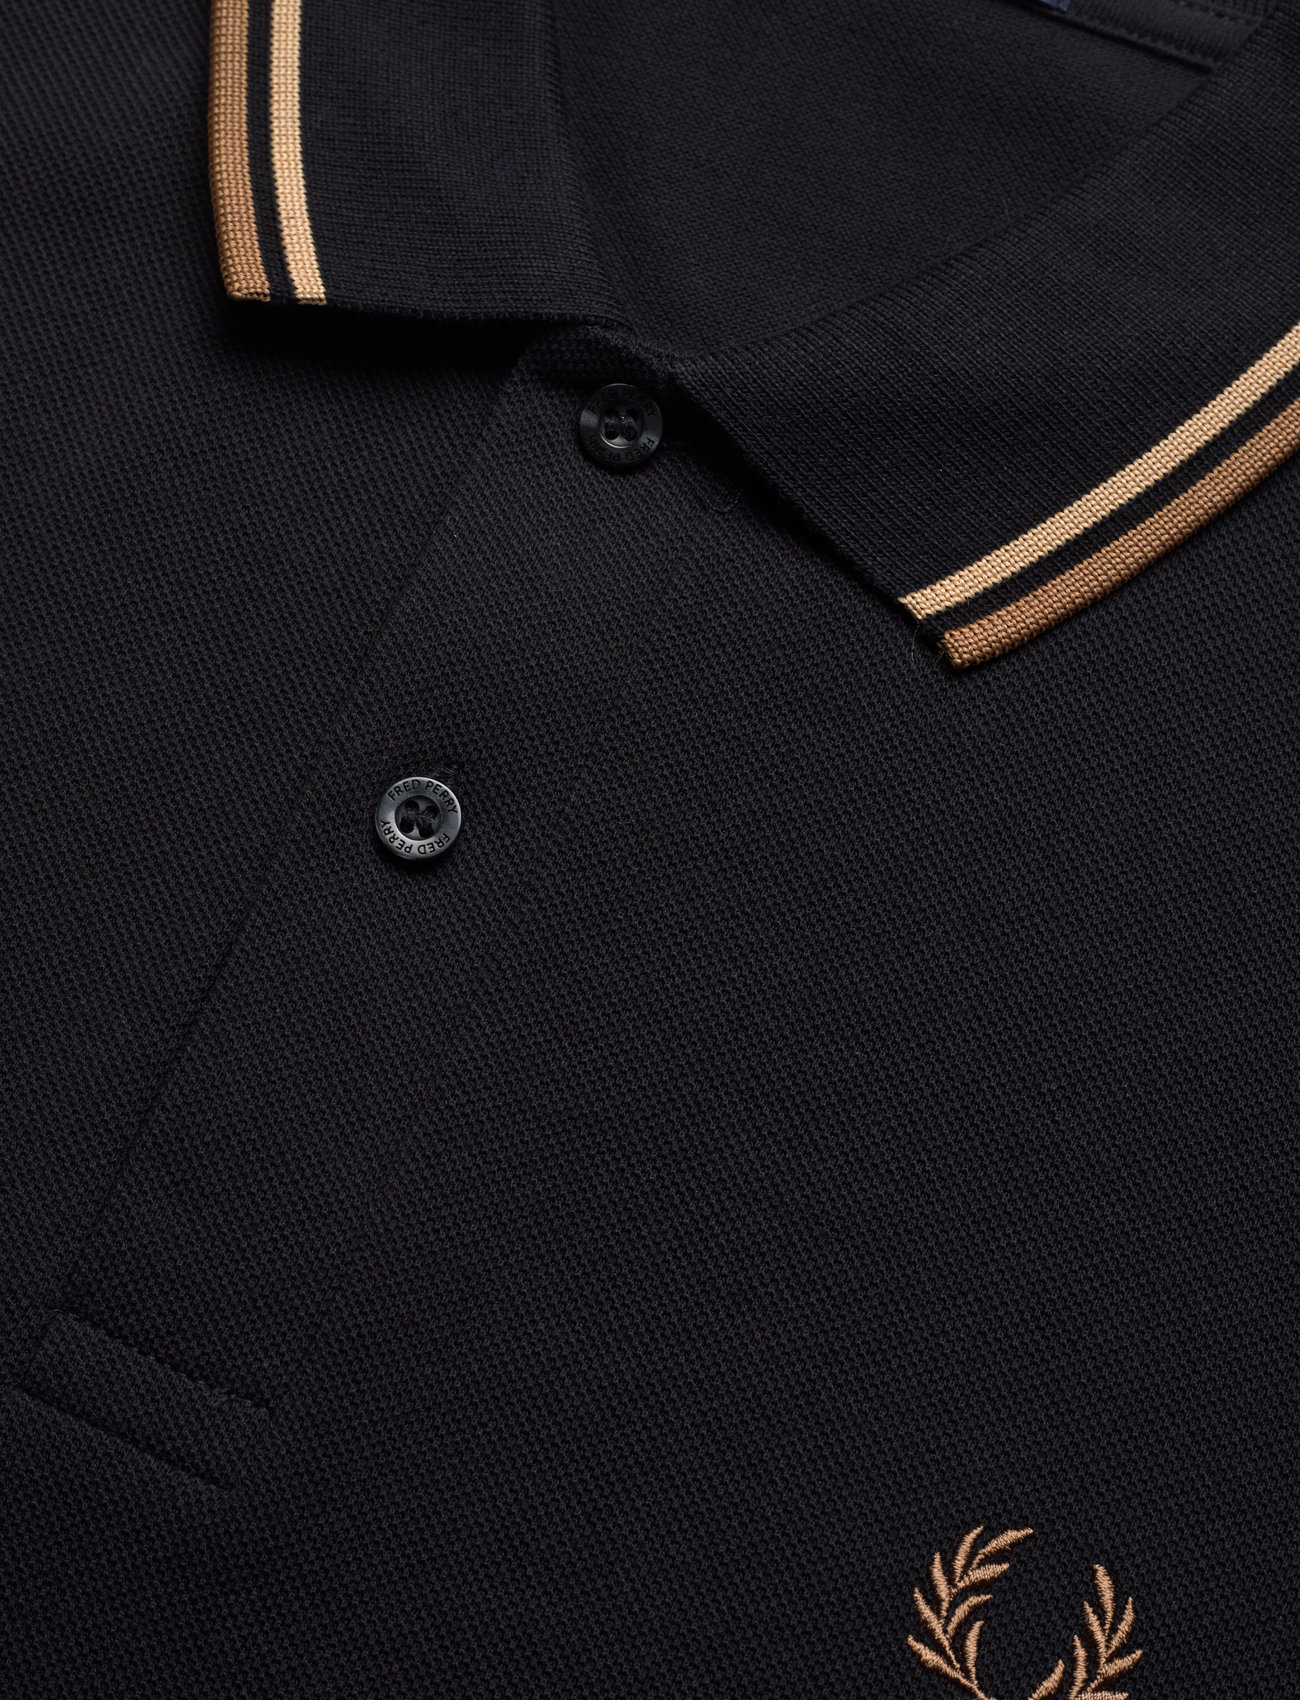 Fred Perry - TWIN TIPPED FP SHIRT - kortærmede poloer - bk/wrmston/shdst - 1